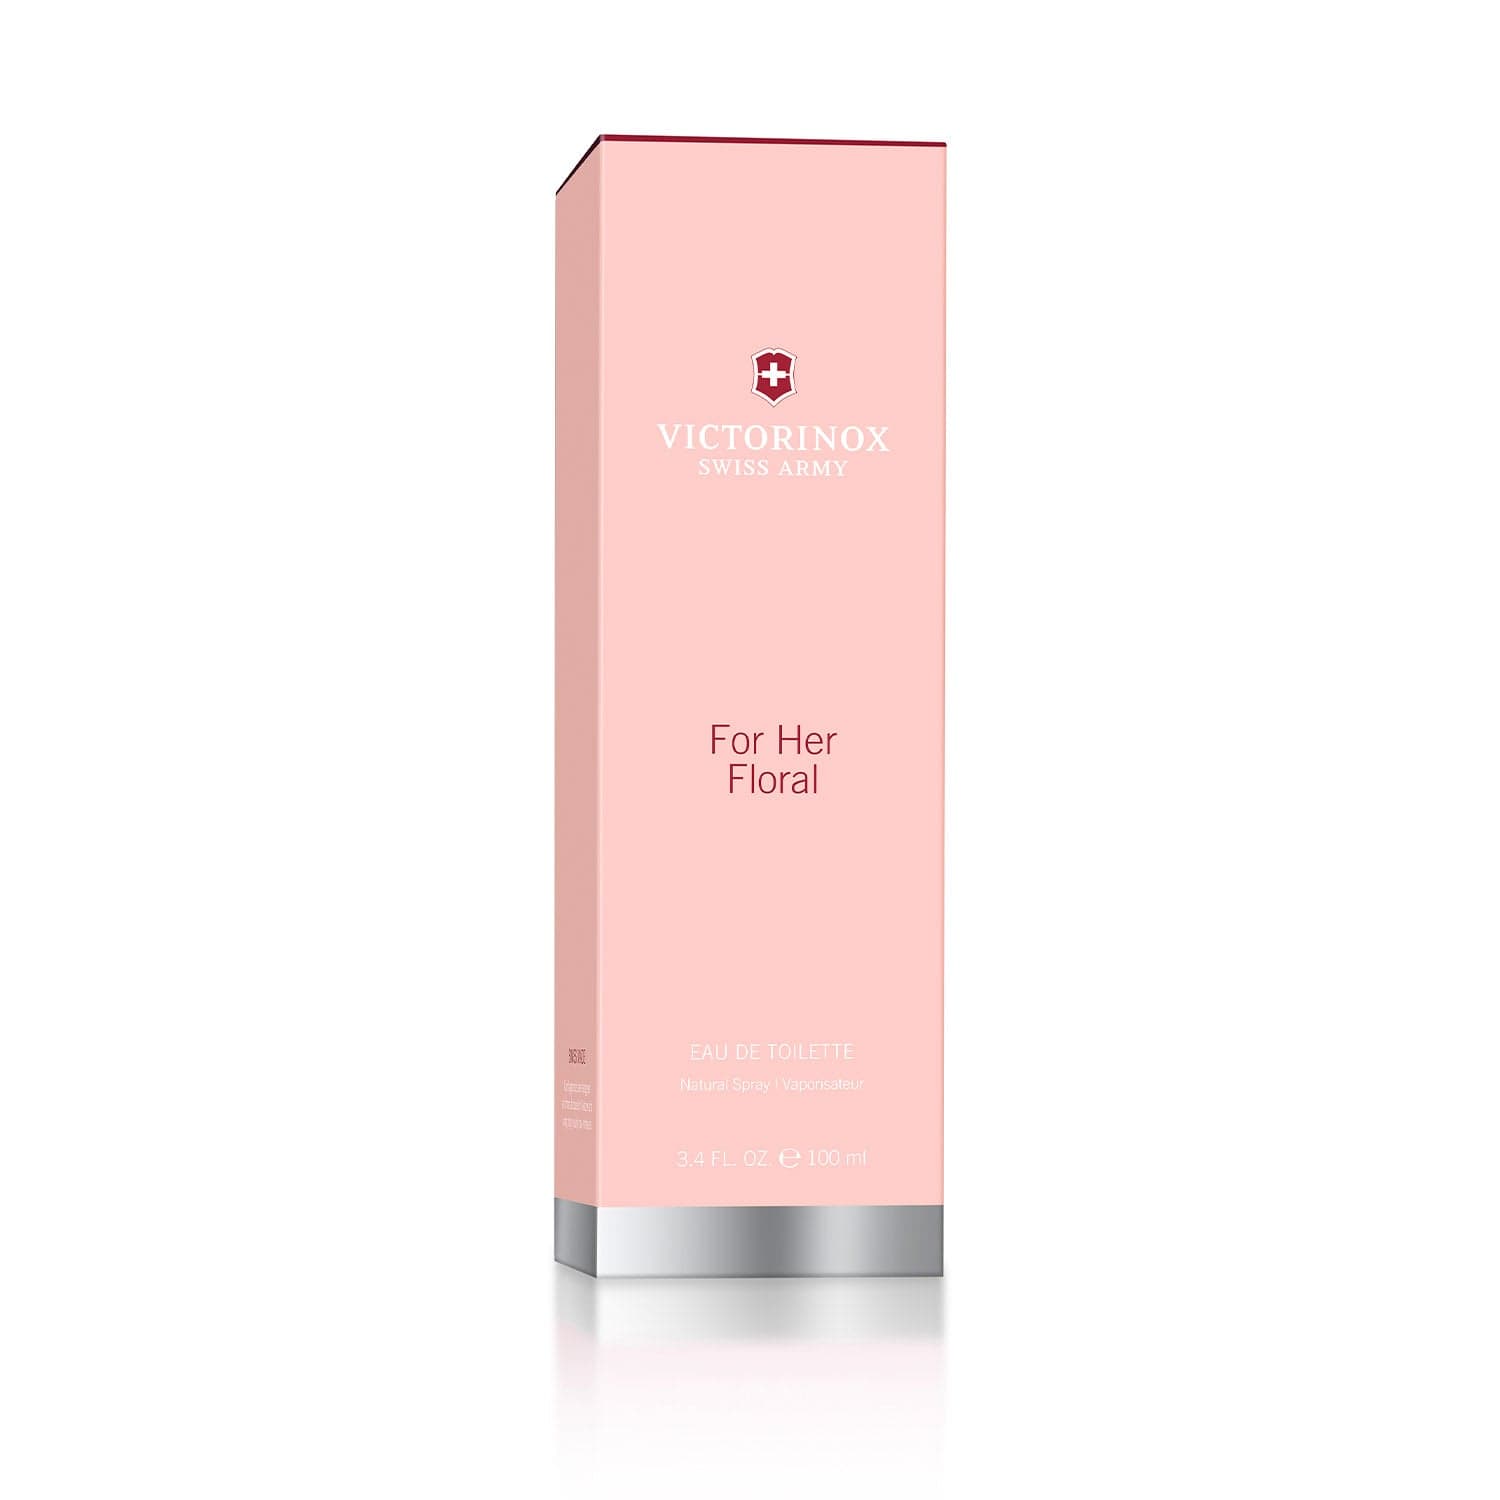 Victorinox Swiss Army for Her Floral EDT 100ml